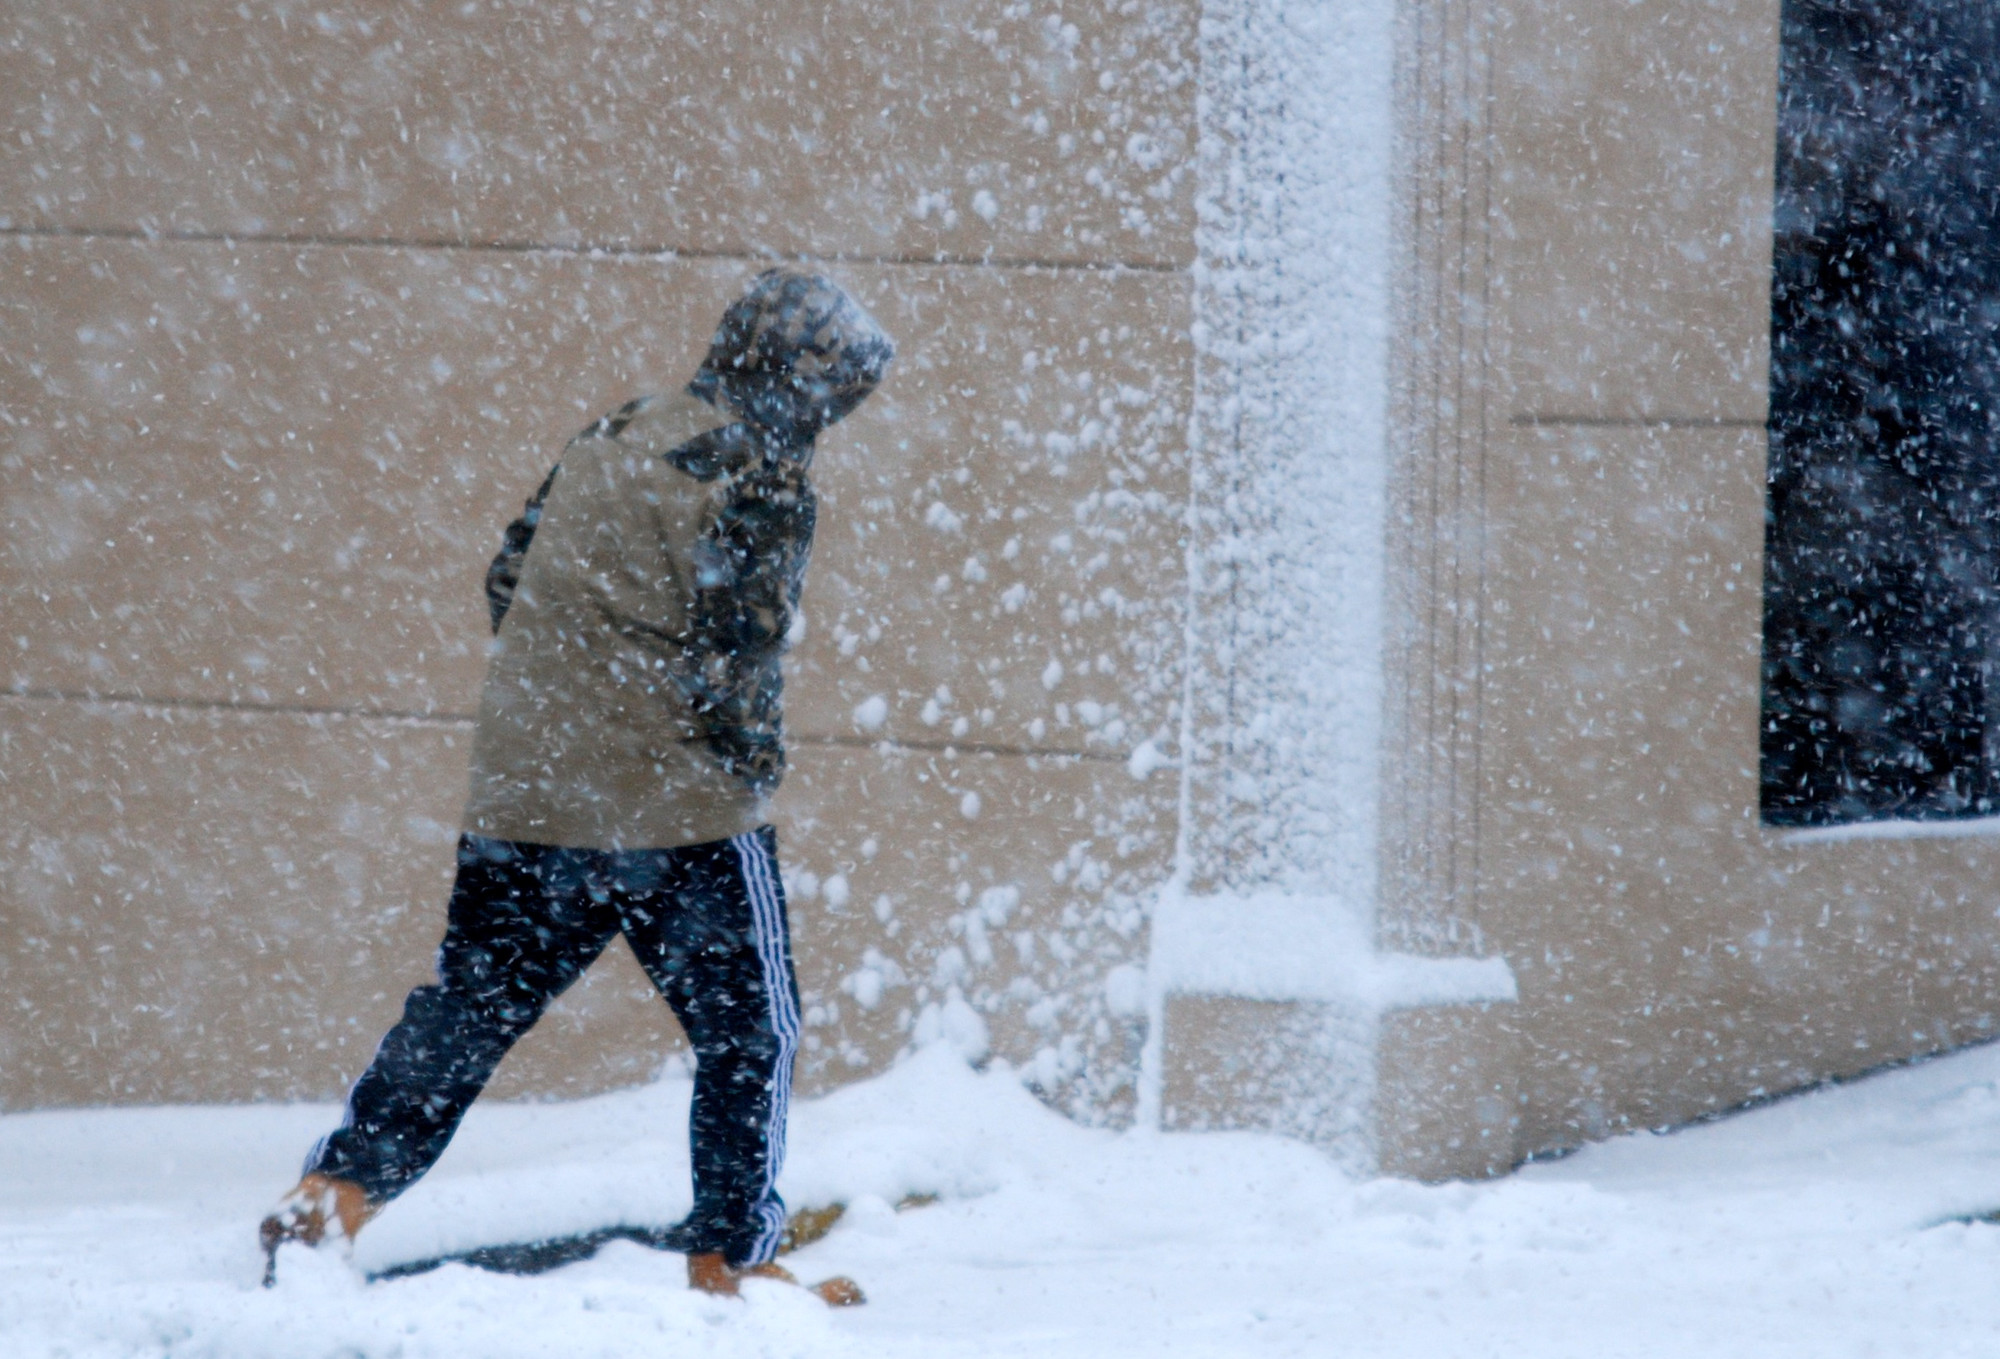 The snow made walking difficult. Above, a man outside the Starbucks at Camp and Merrick avenues in North Merrick.